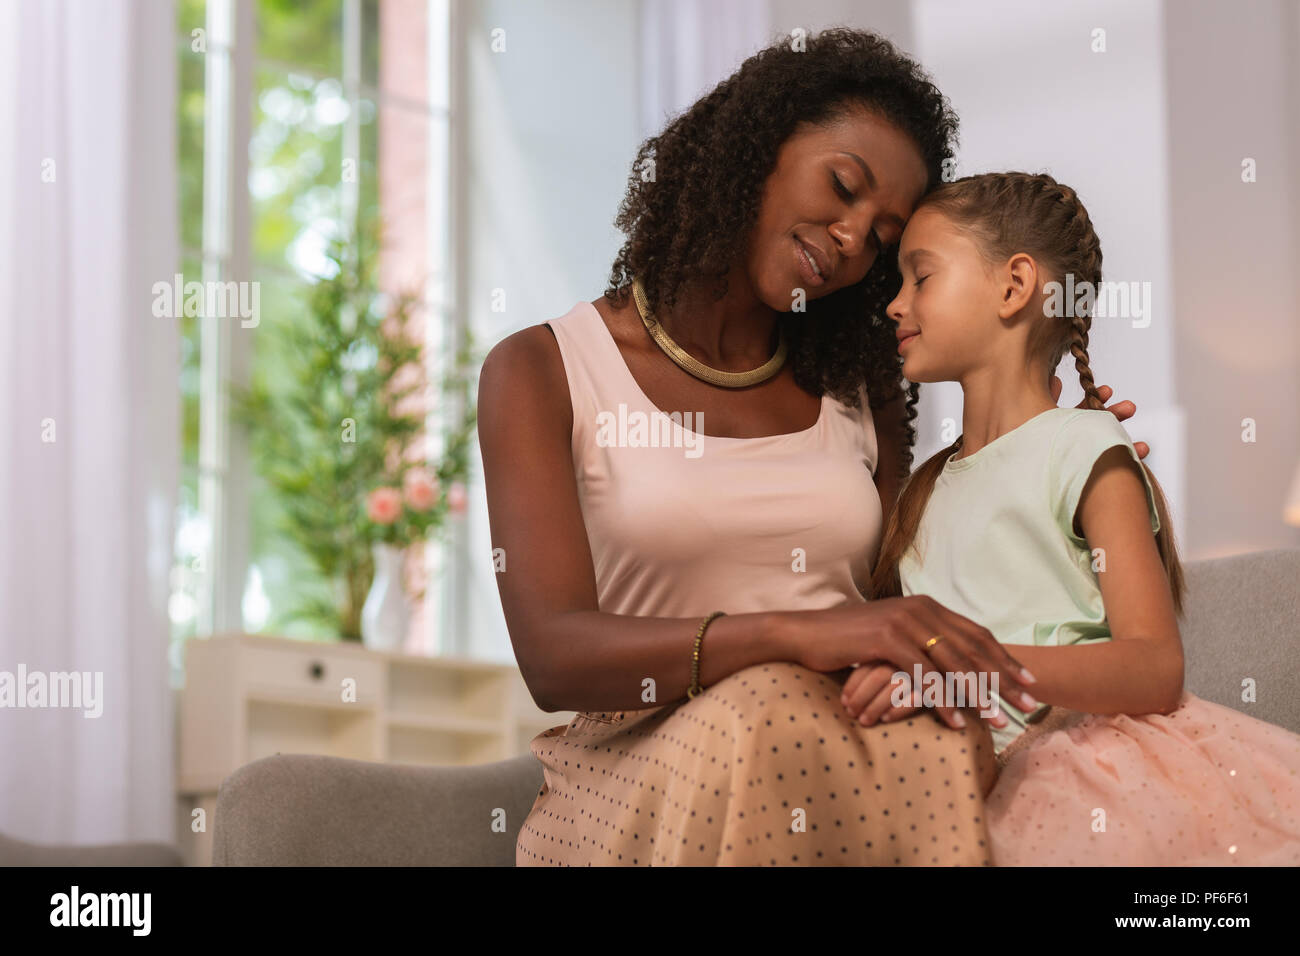 Pleasant caring mother being with her daughter Stock Photo